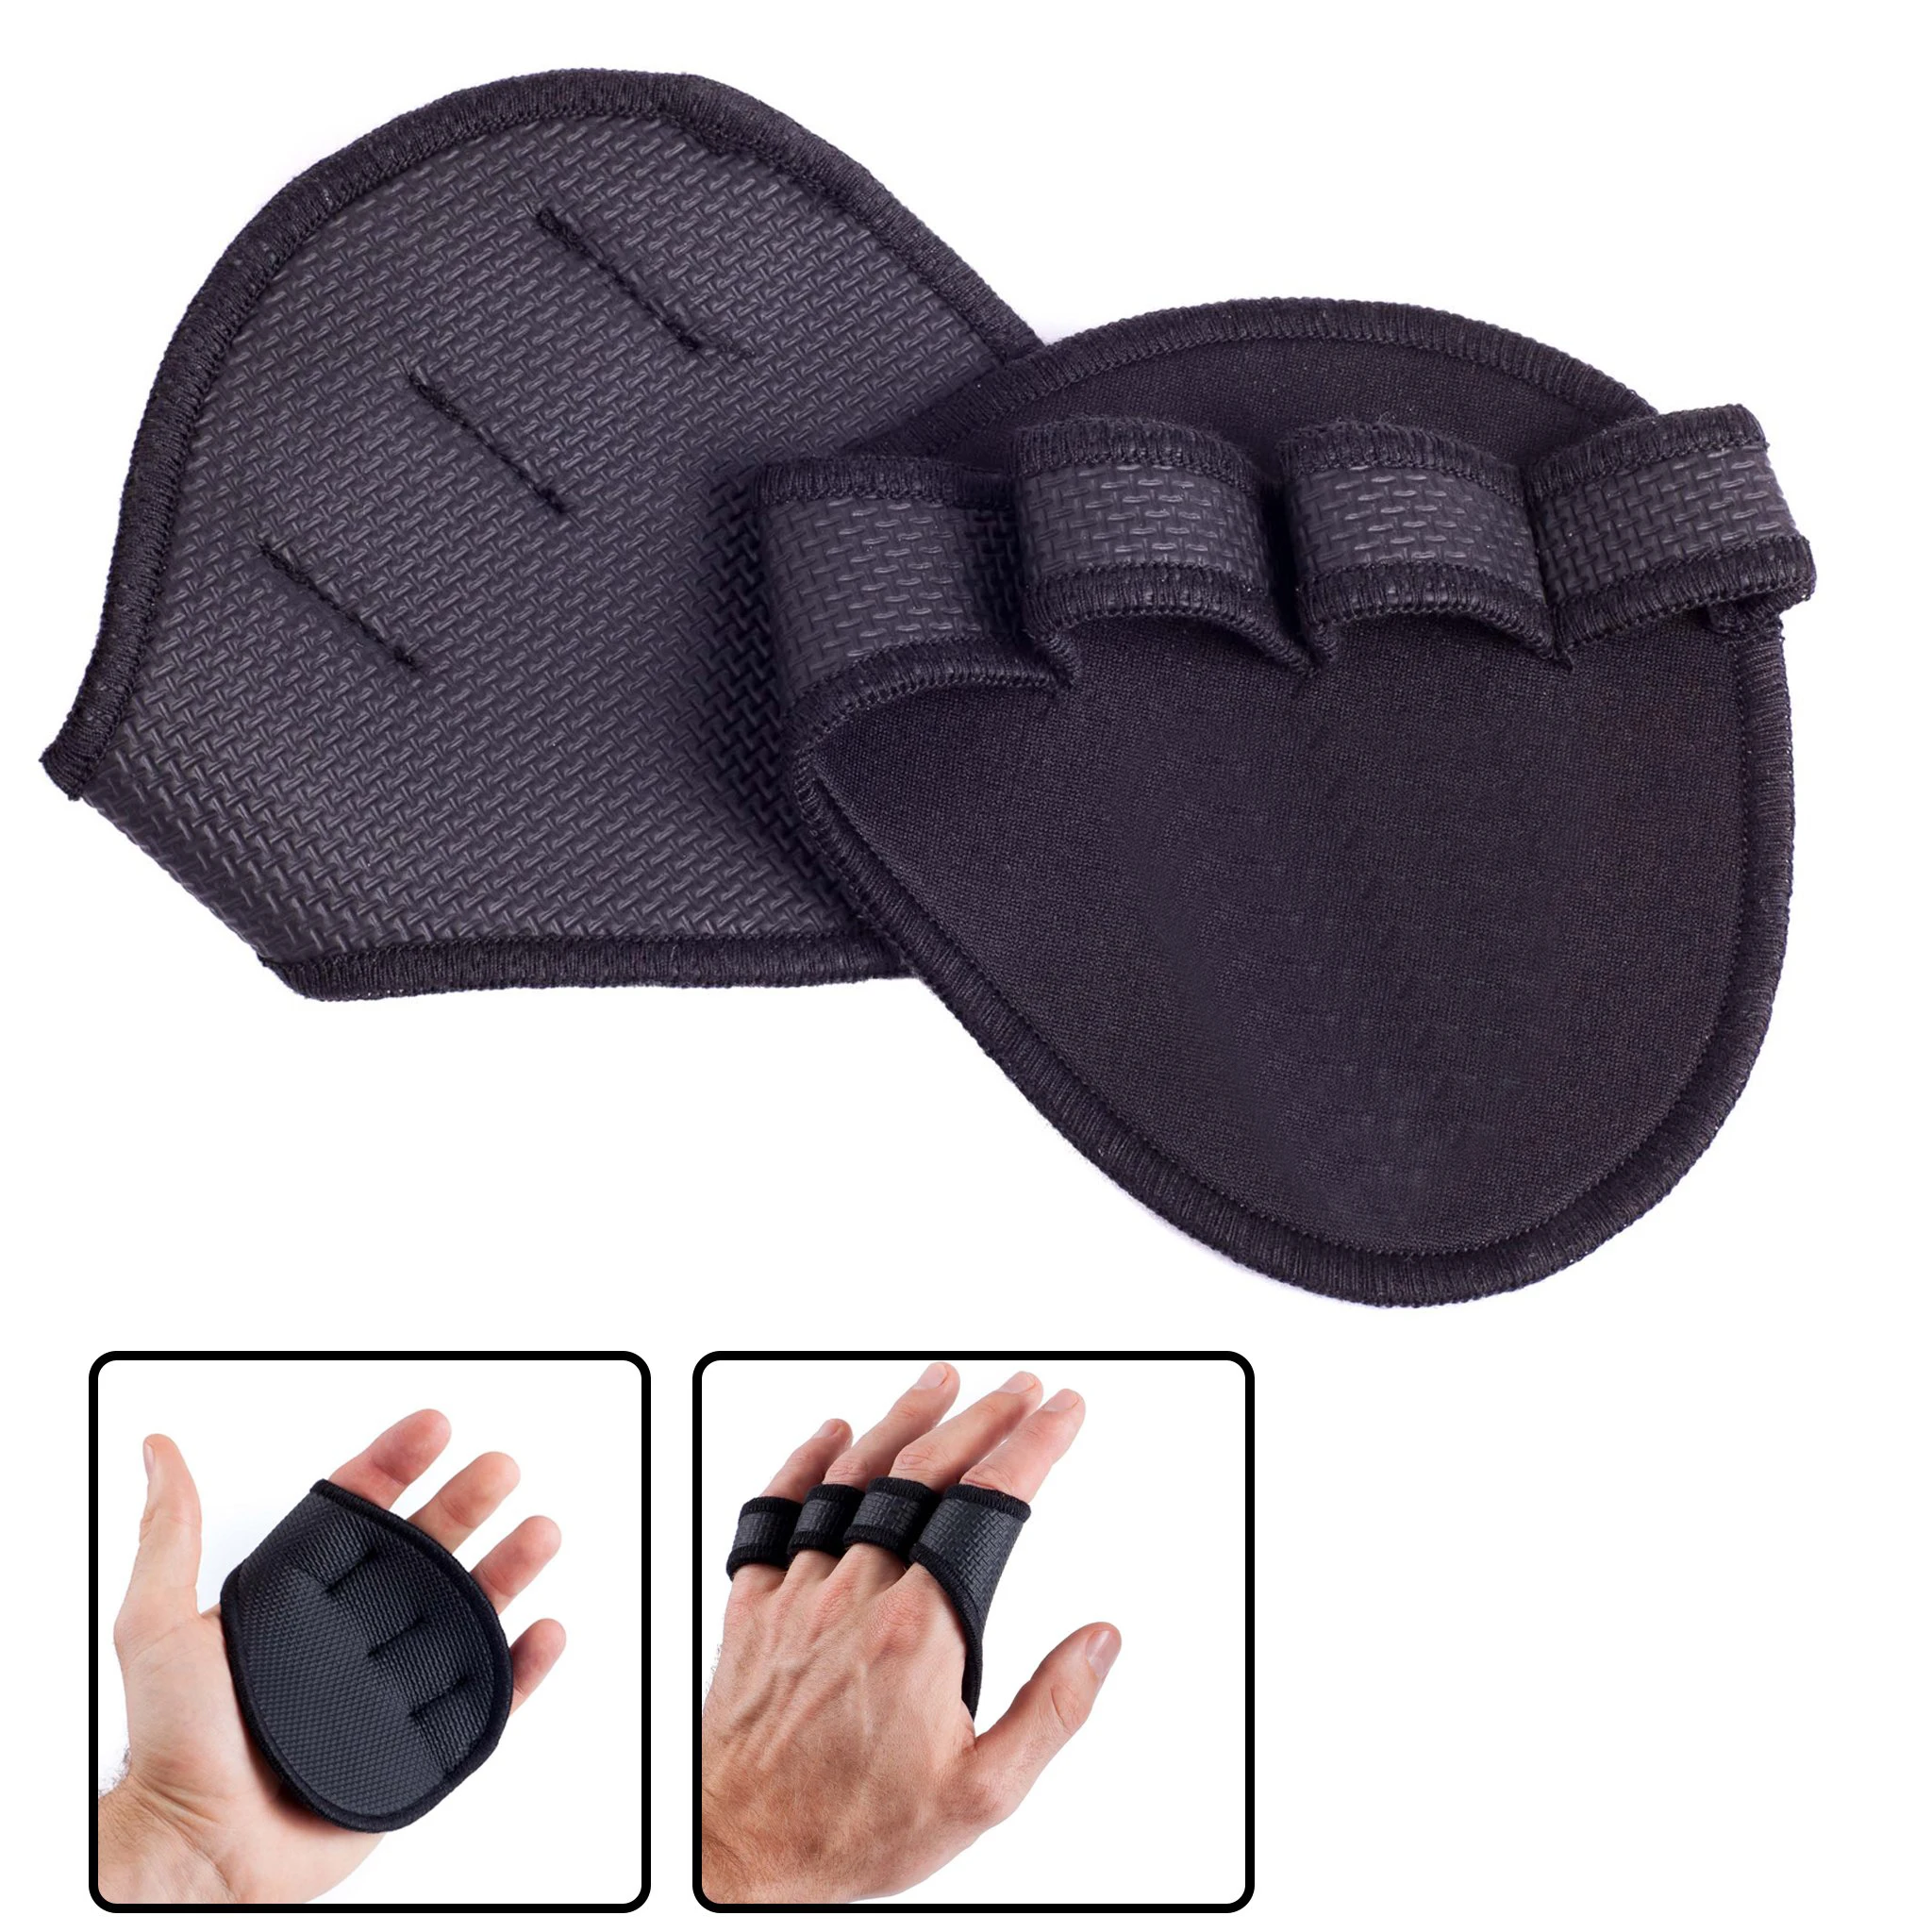 

Palm Dumbbell Grips Pads, Anti Skid, Weight Cross Training Gloves, Gym Workout, Fitness Sports, Hand Protector, Unisex